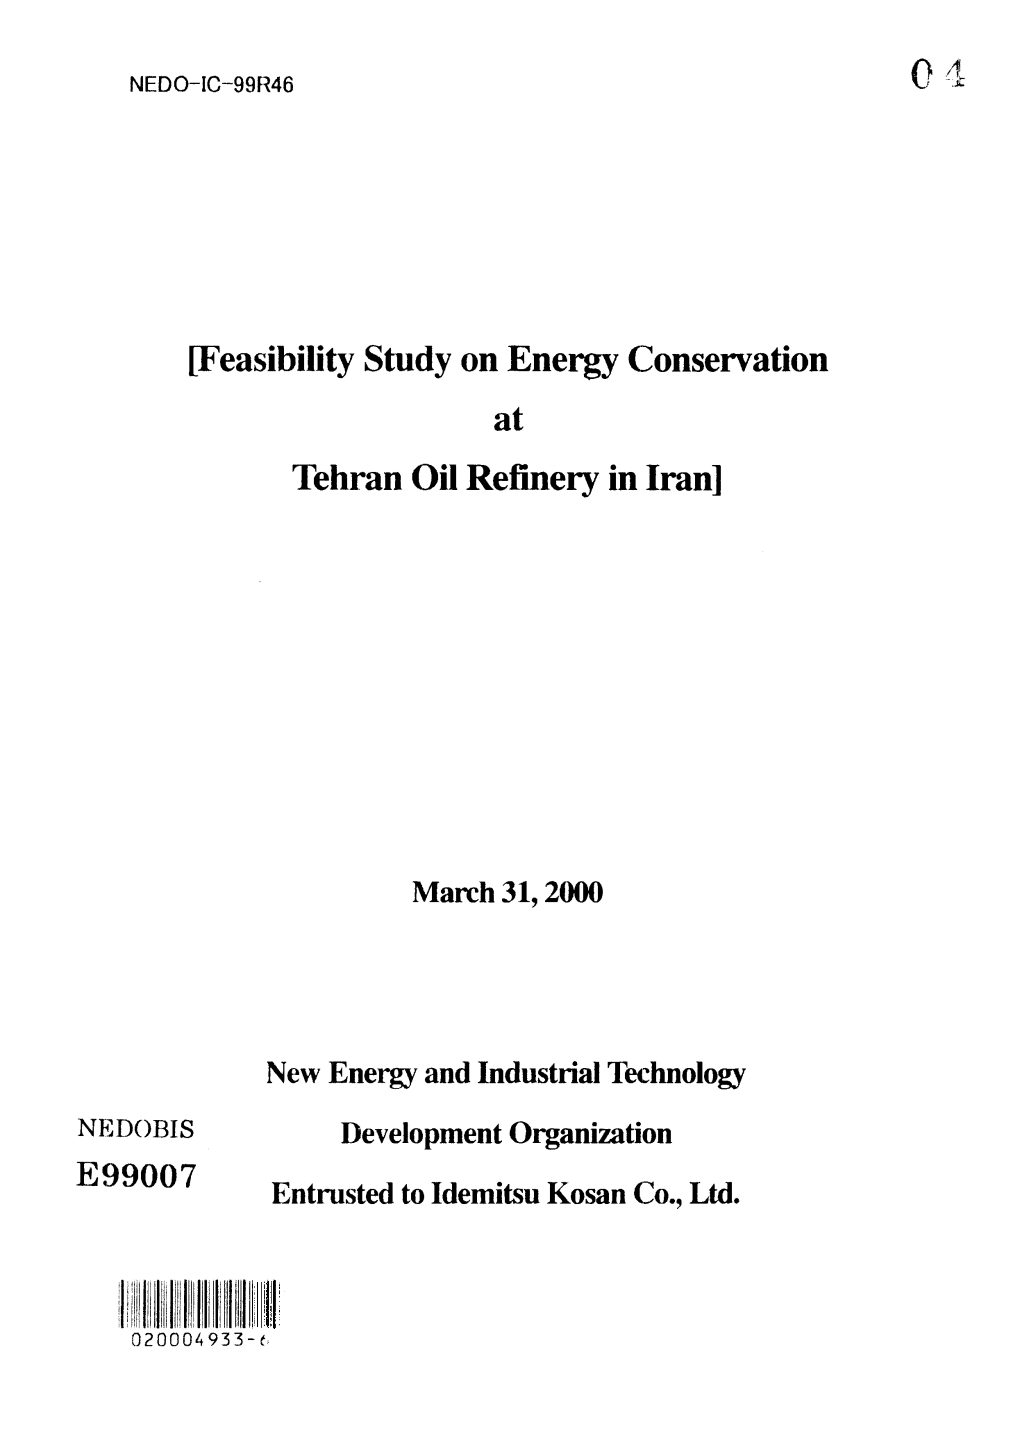 Report of Year 2000 Version on Feasibility Study on Energy